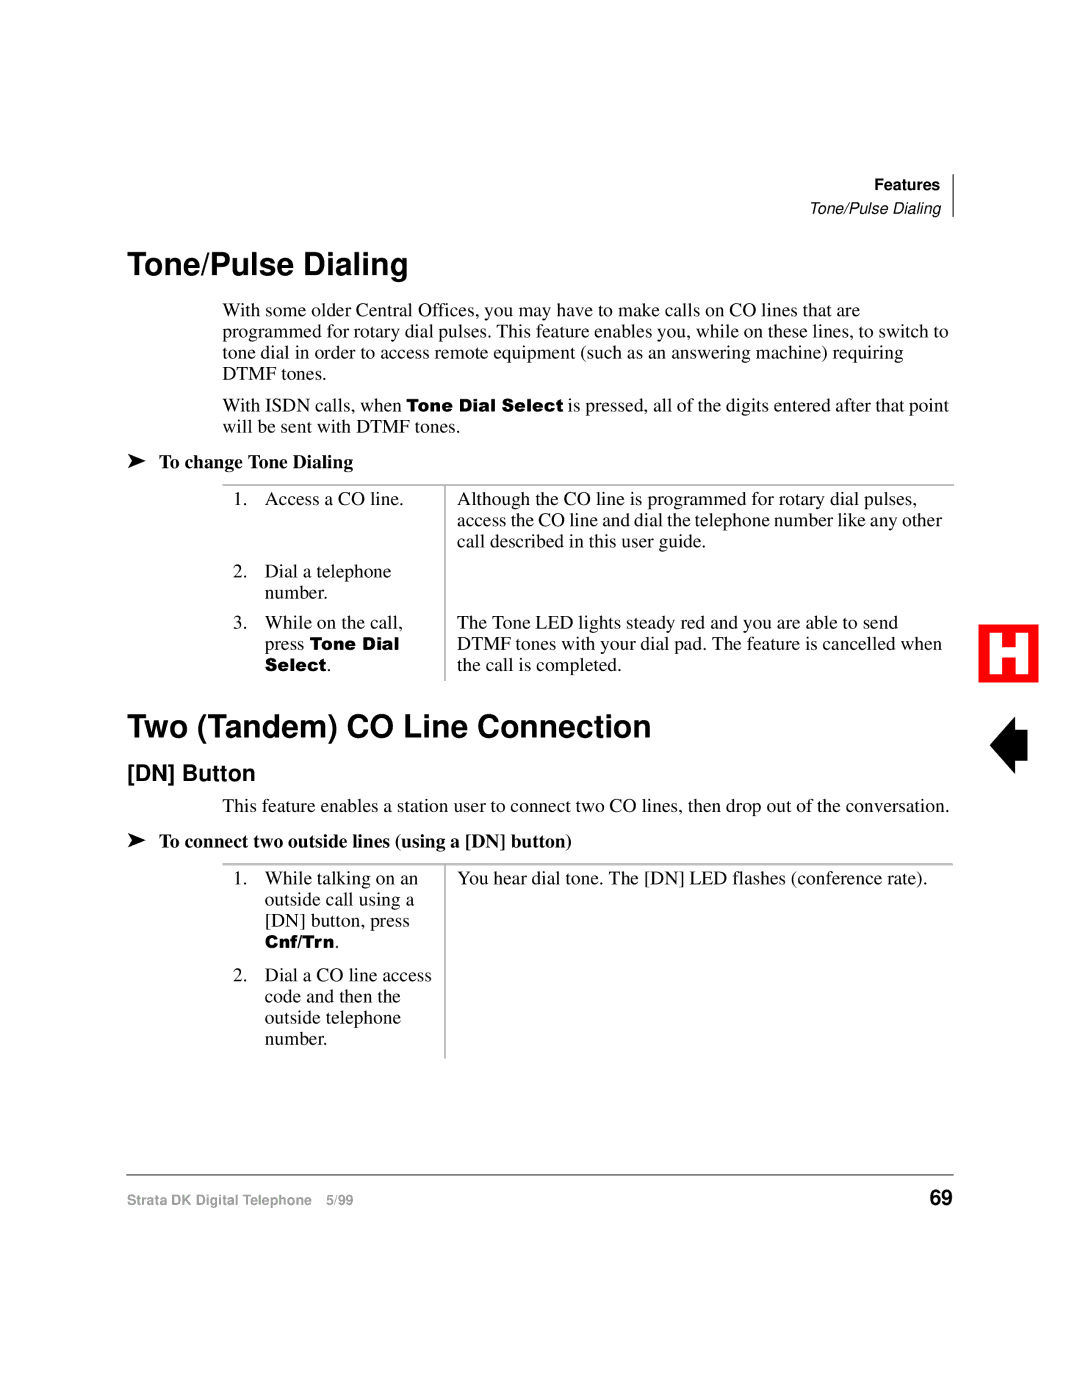 Toshiba Digital Telephone manual Tone/Pulse Dialing, Two Tandem CO Line Connection, DN Button, To change Tone Dialing 